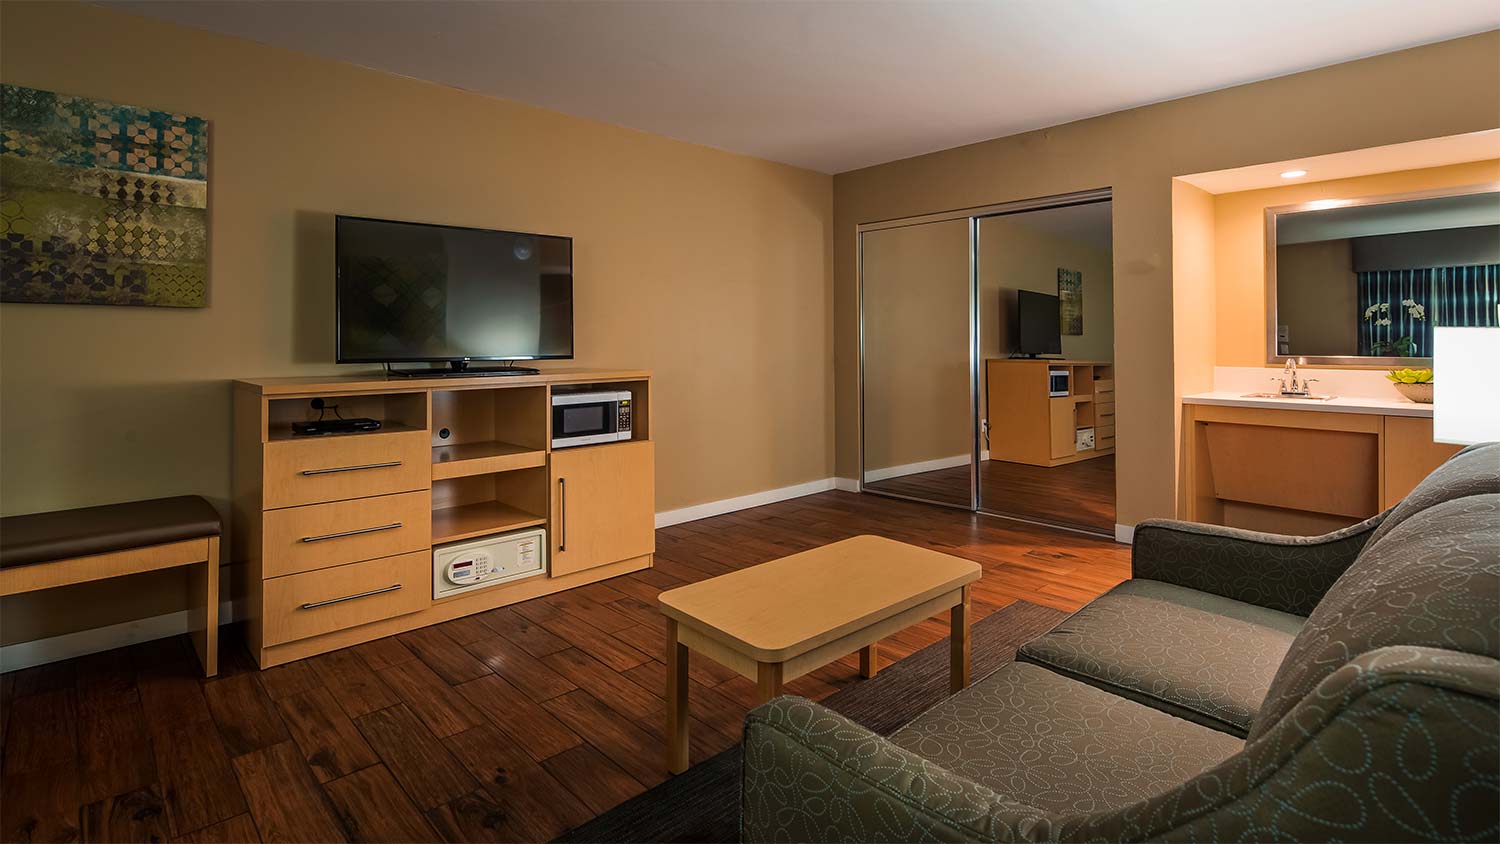 Room displaying TV safe microwave and refrigerator a mirrored closet sofa and sink